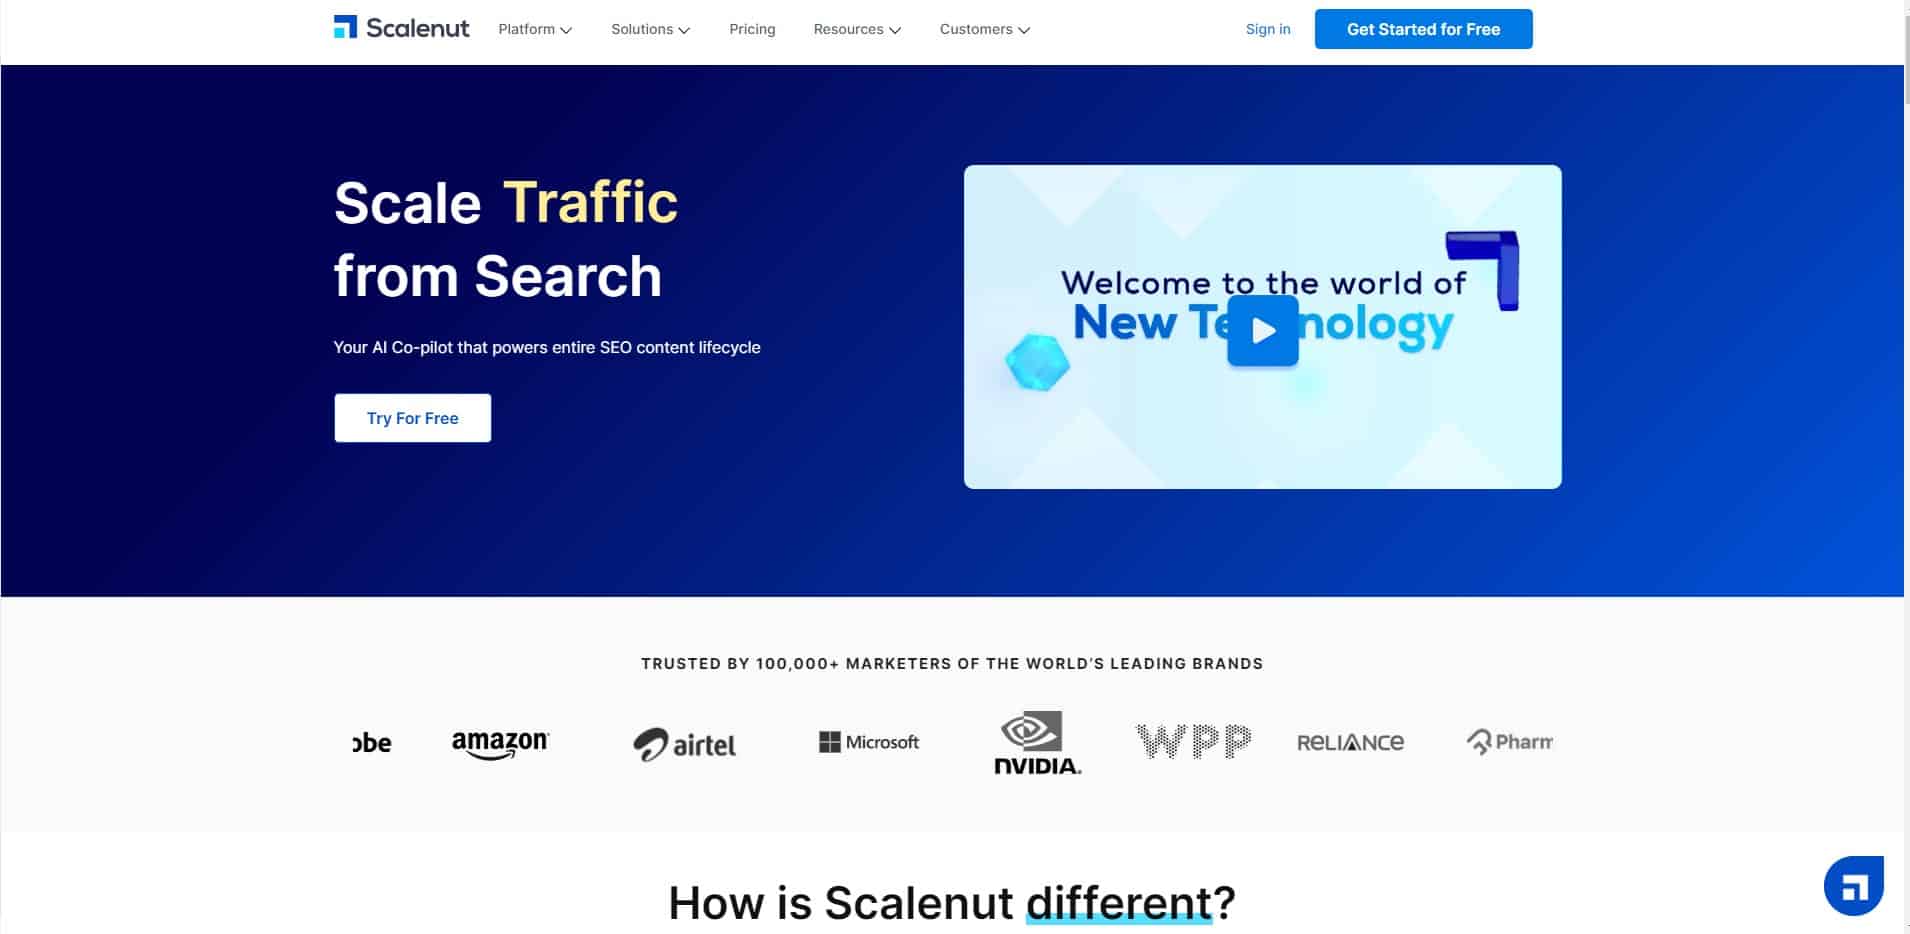 Scalenut best rytr alternatives and competitors AI-driven content creation platform that streamlines the content generation process